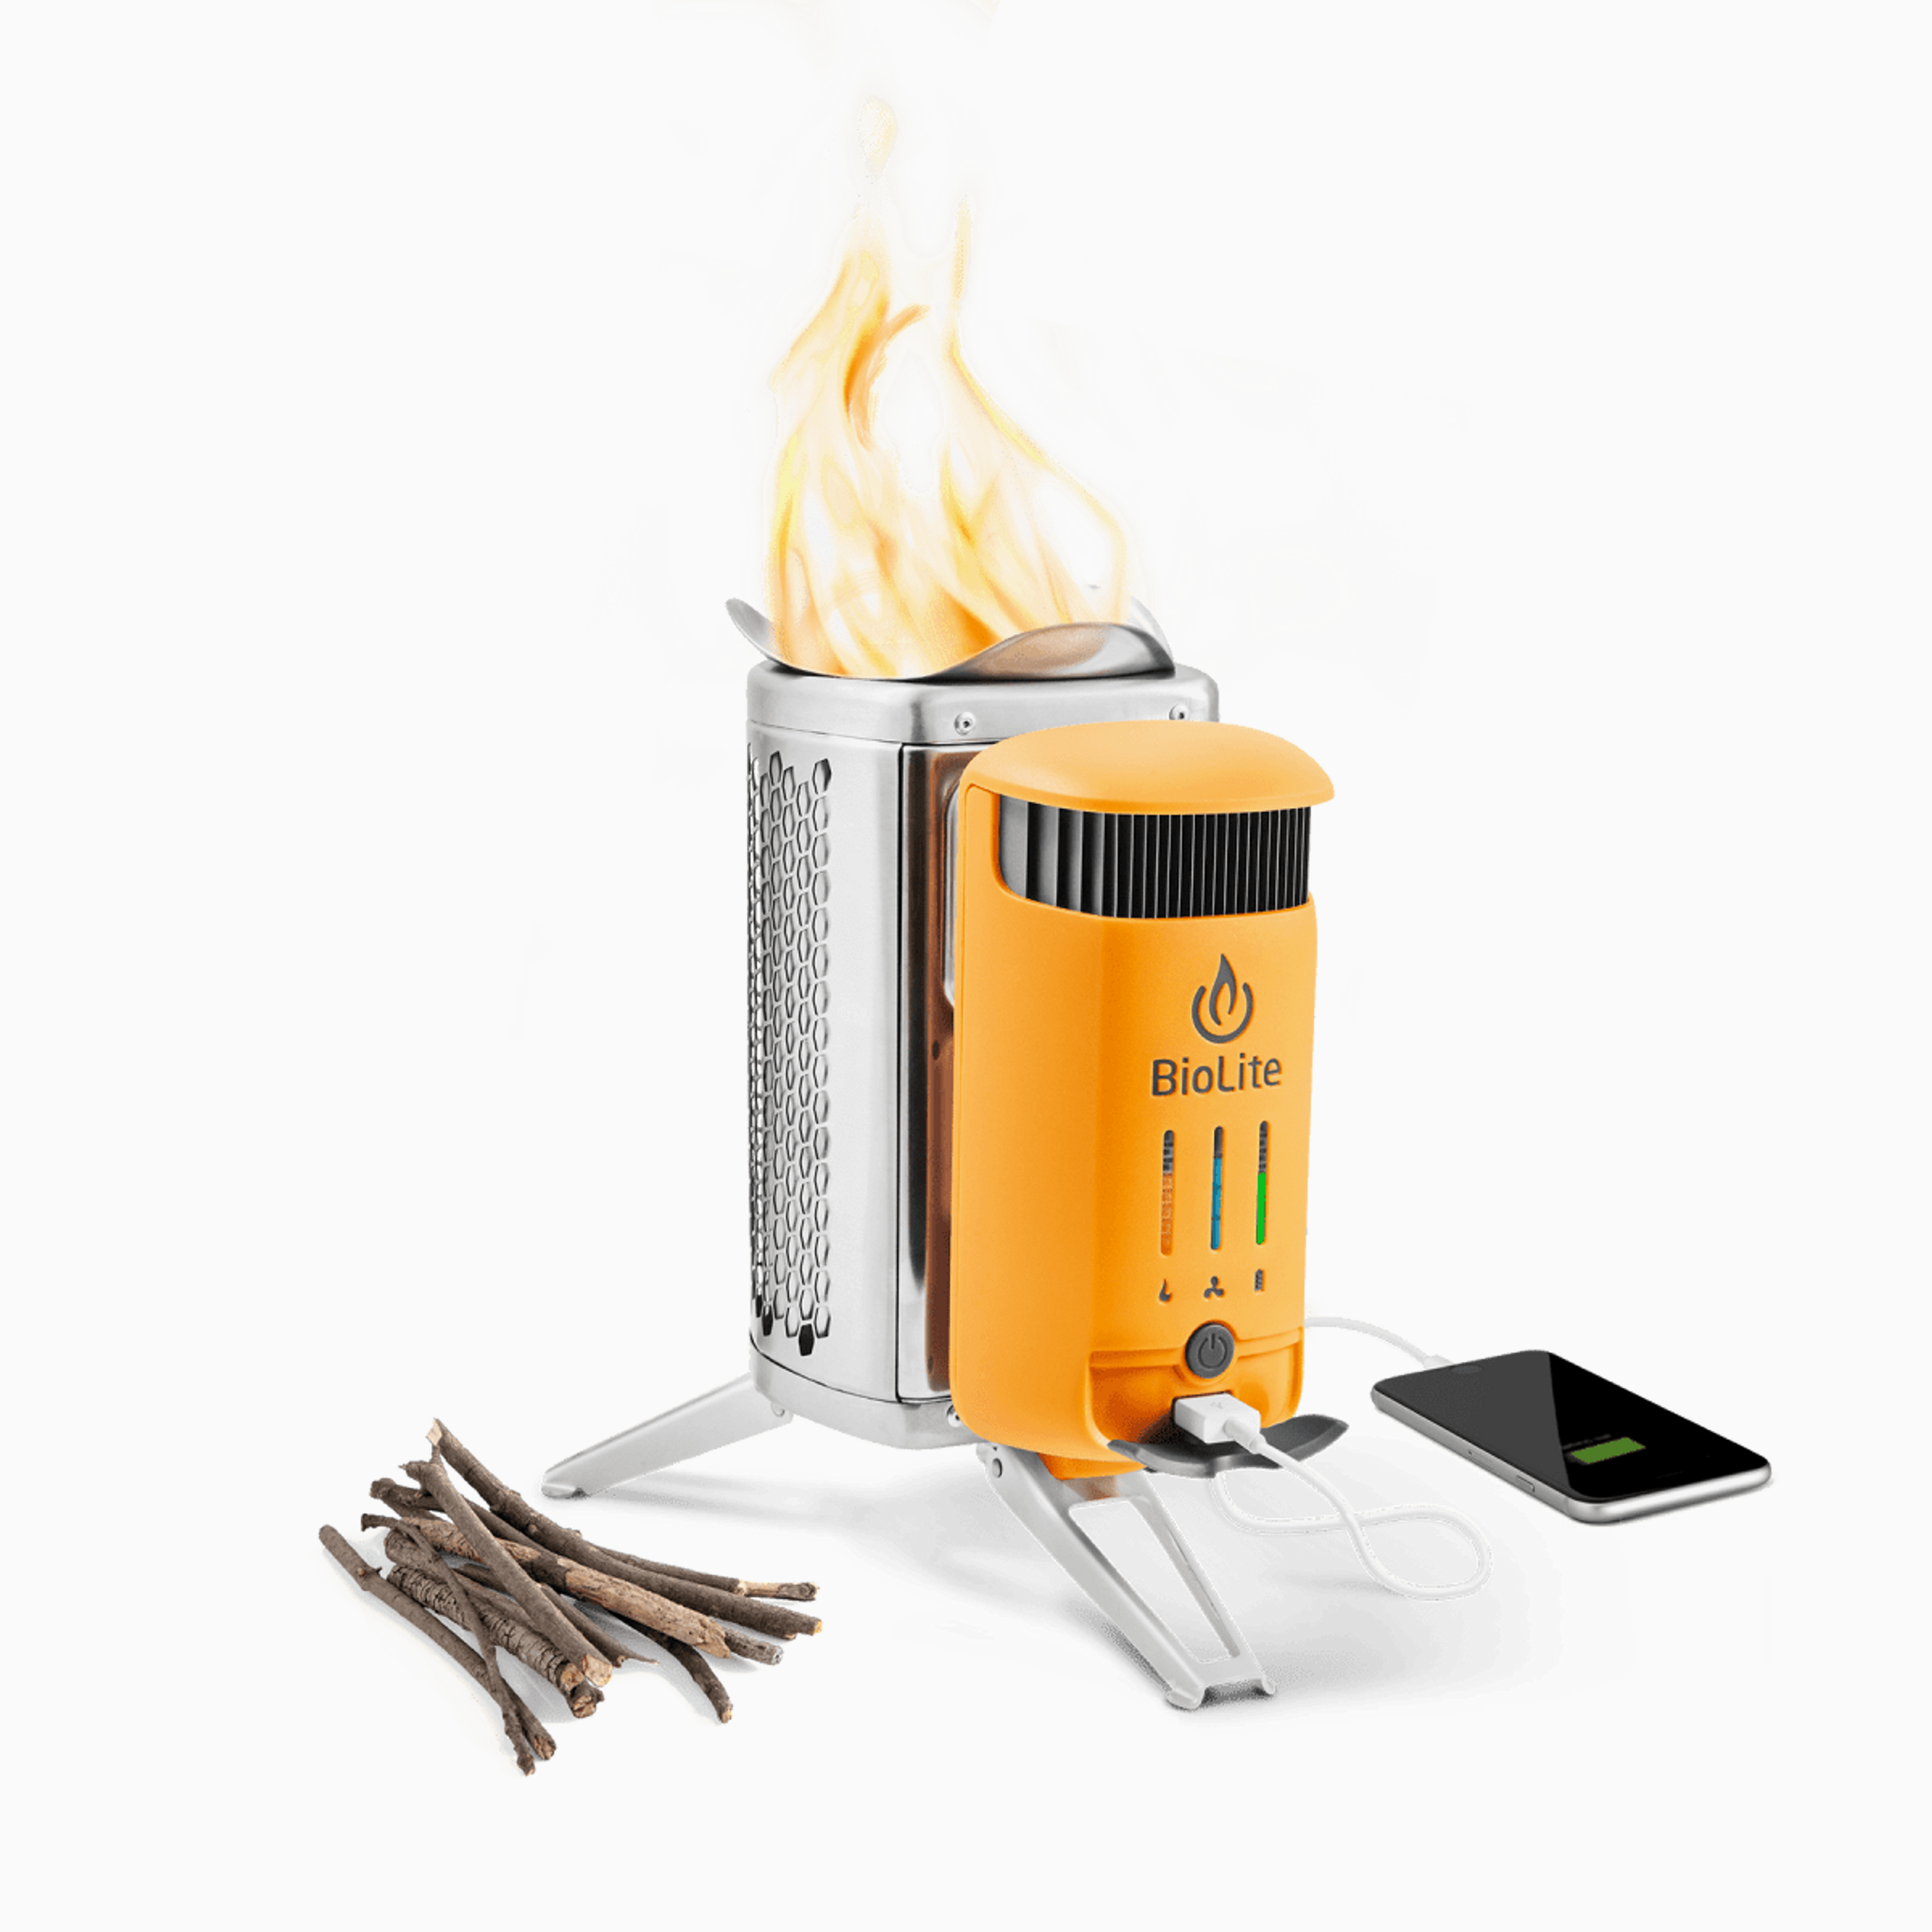 CampStove Complete Cook Kit